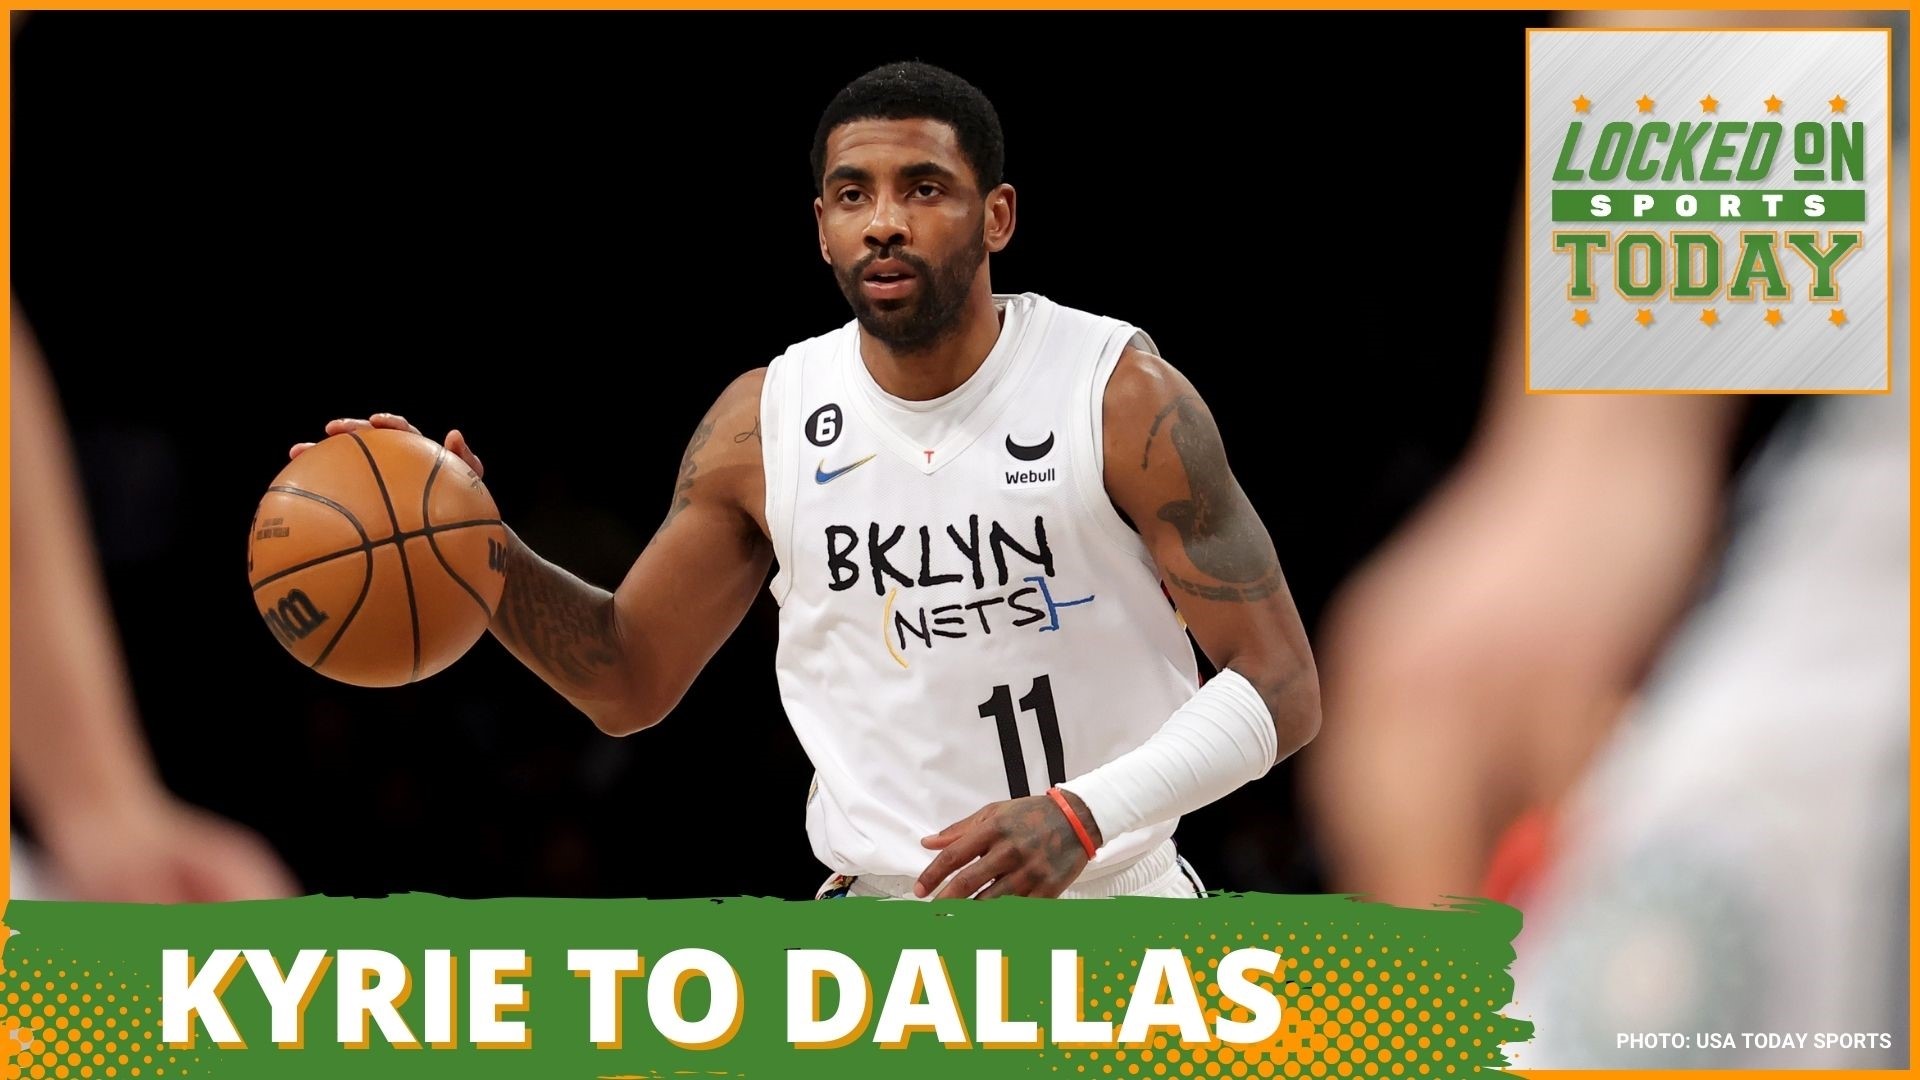 Discussing the day's top sports stories from Kyrie joining the Dallas Mavericks to what's next for the Nets and trading for Higgins in the NFL.